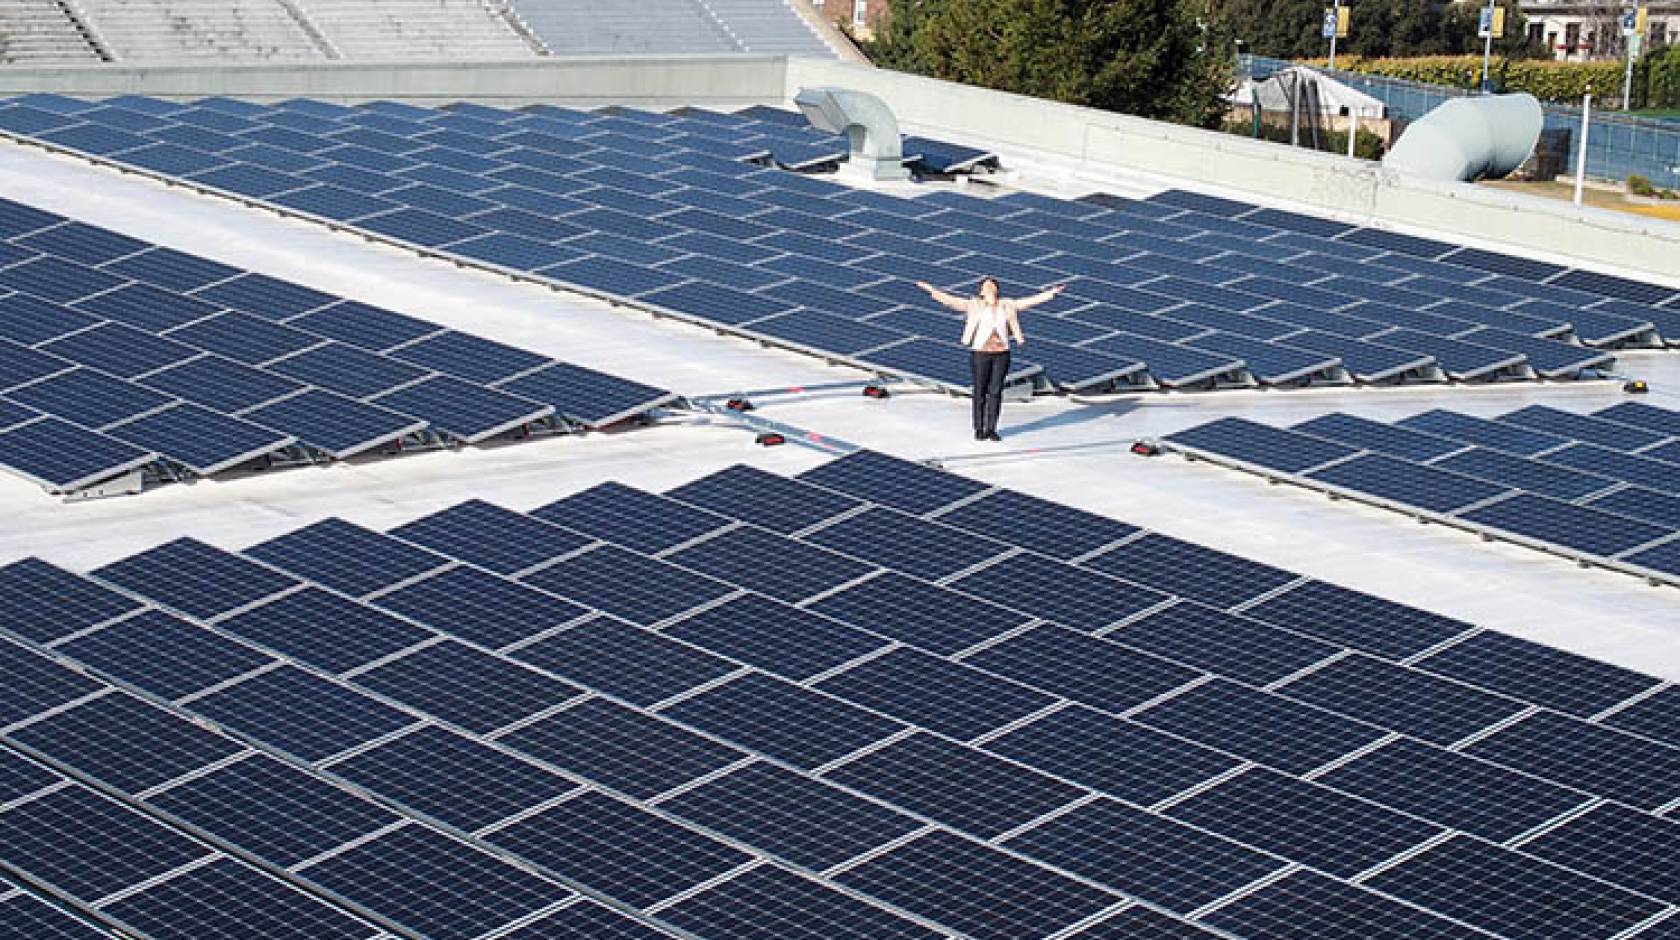 Kira Stoll, UC Berkeley's director of sustainability stands with solar panels on the top of the Recreational Sports Facility. 